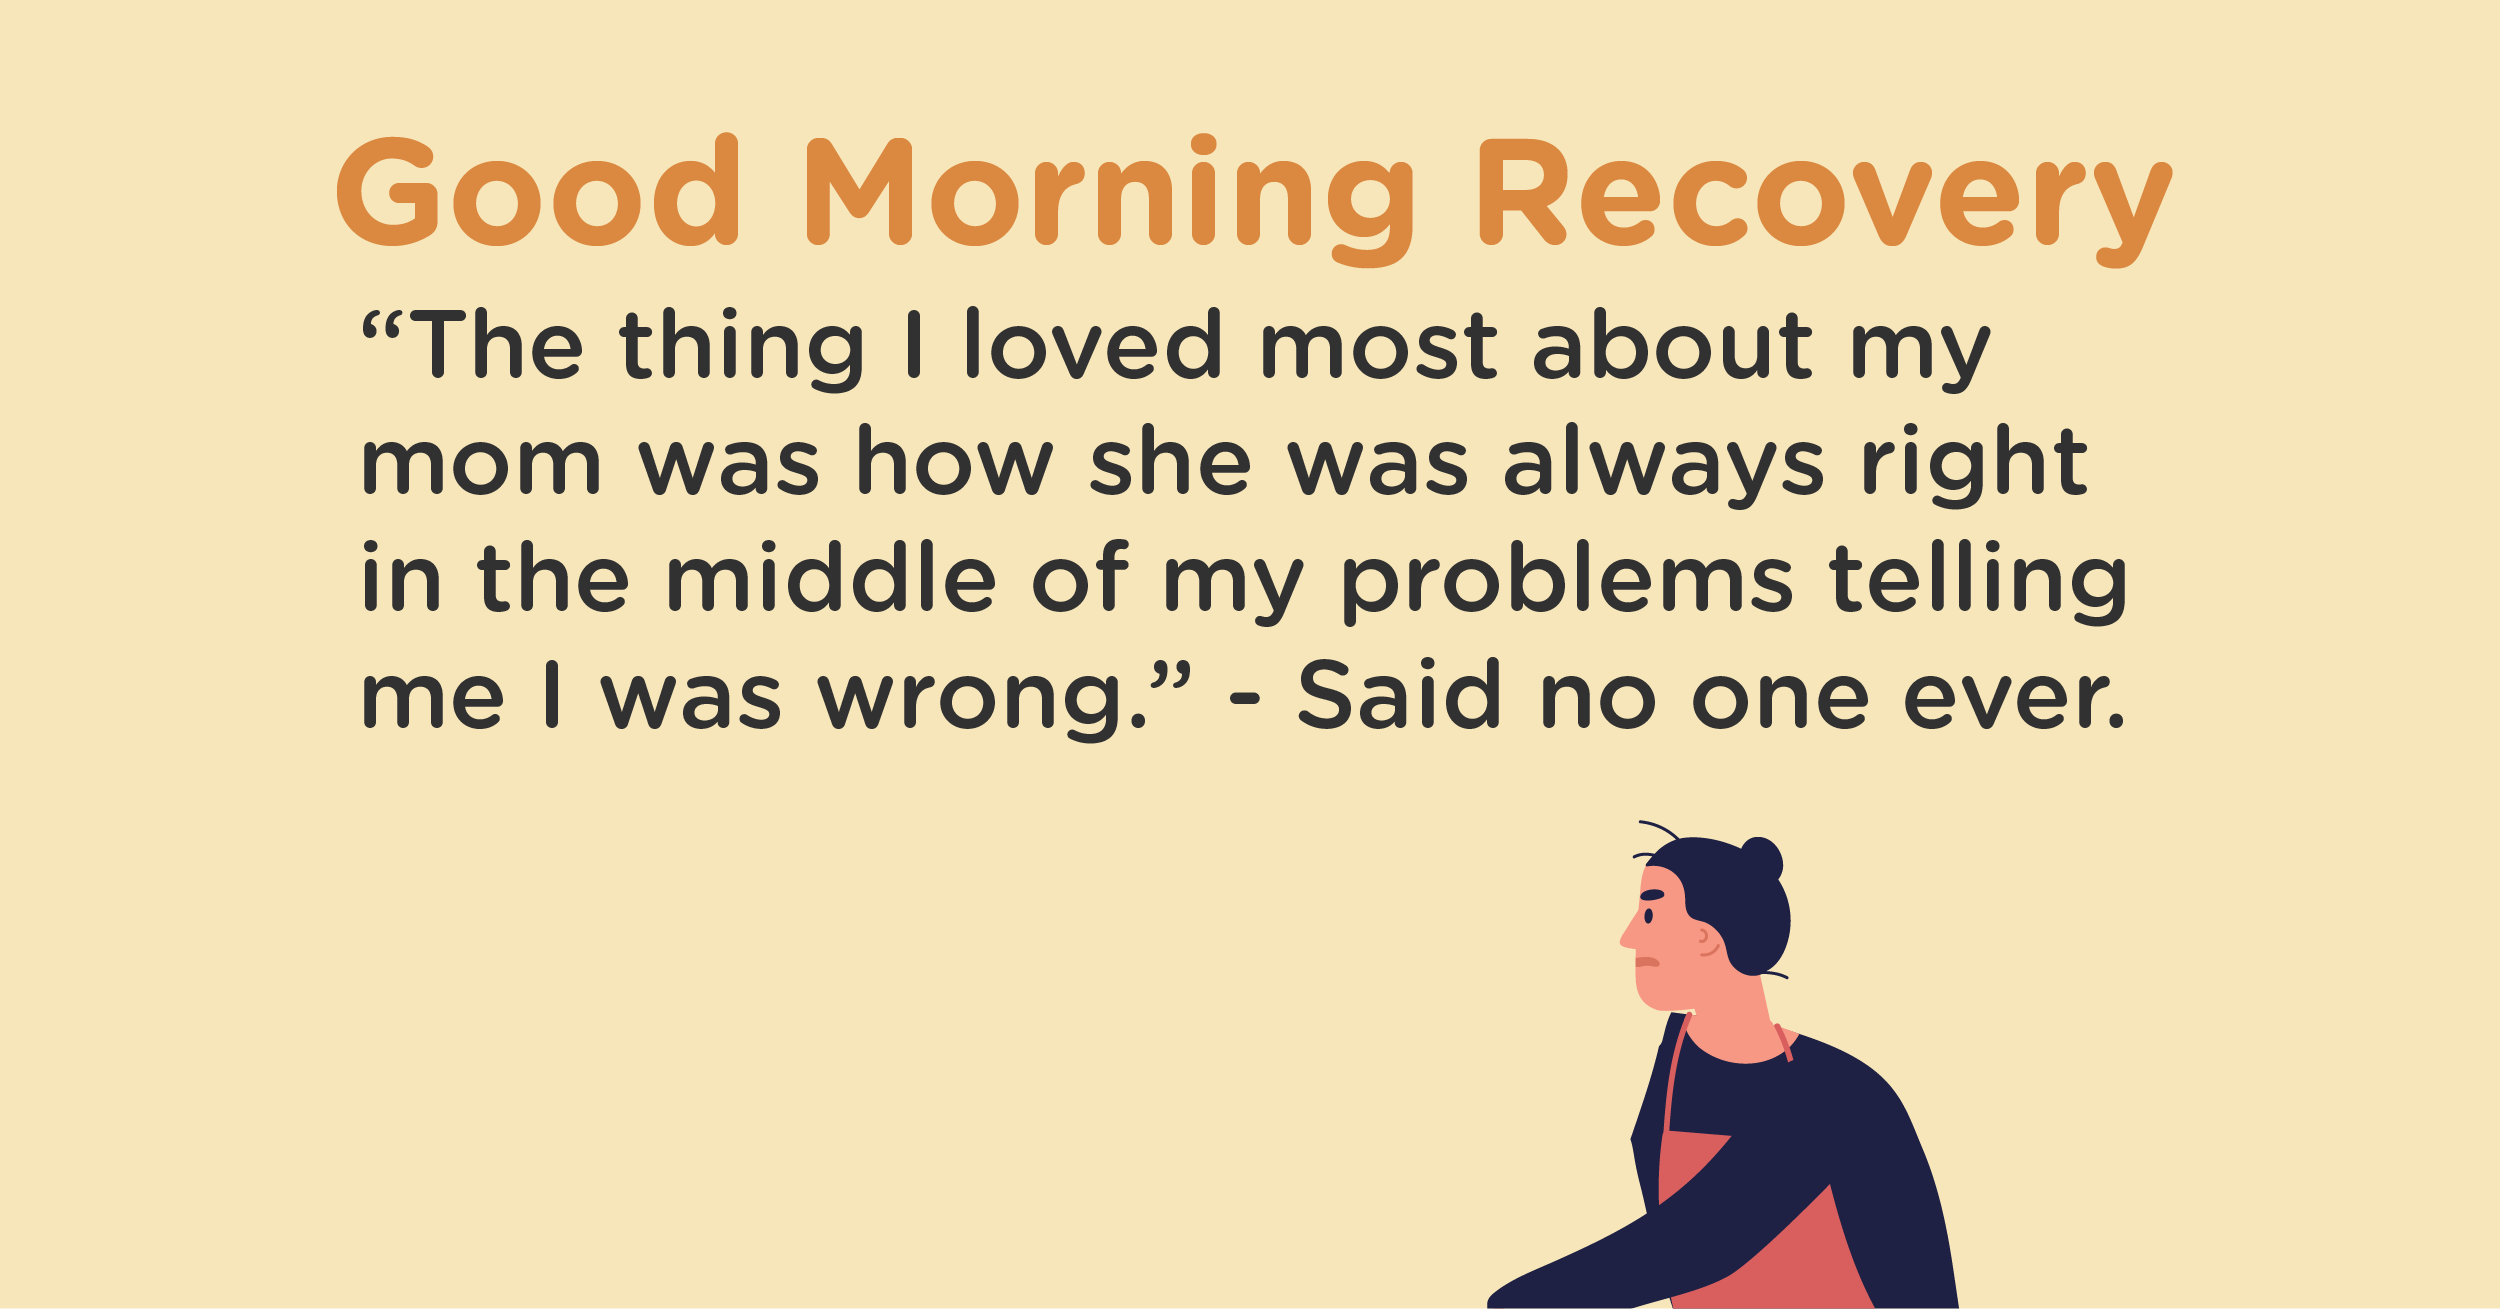 No one says this Recovery quote